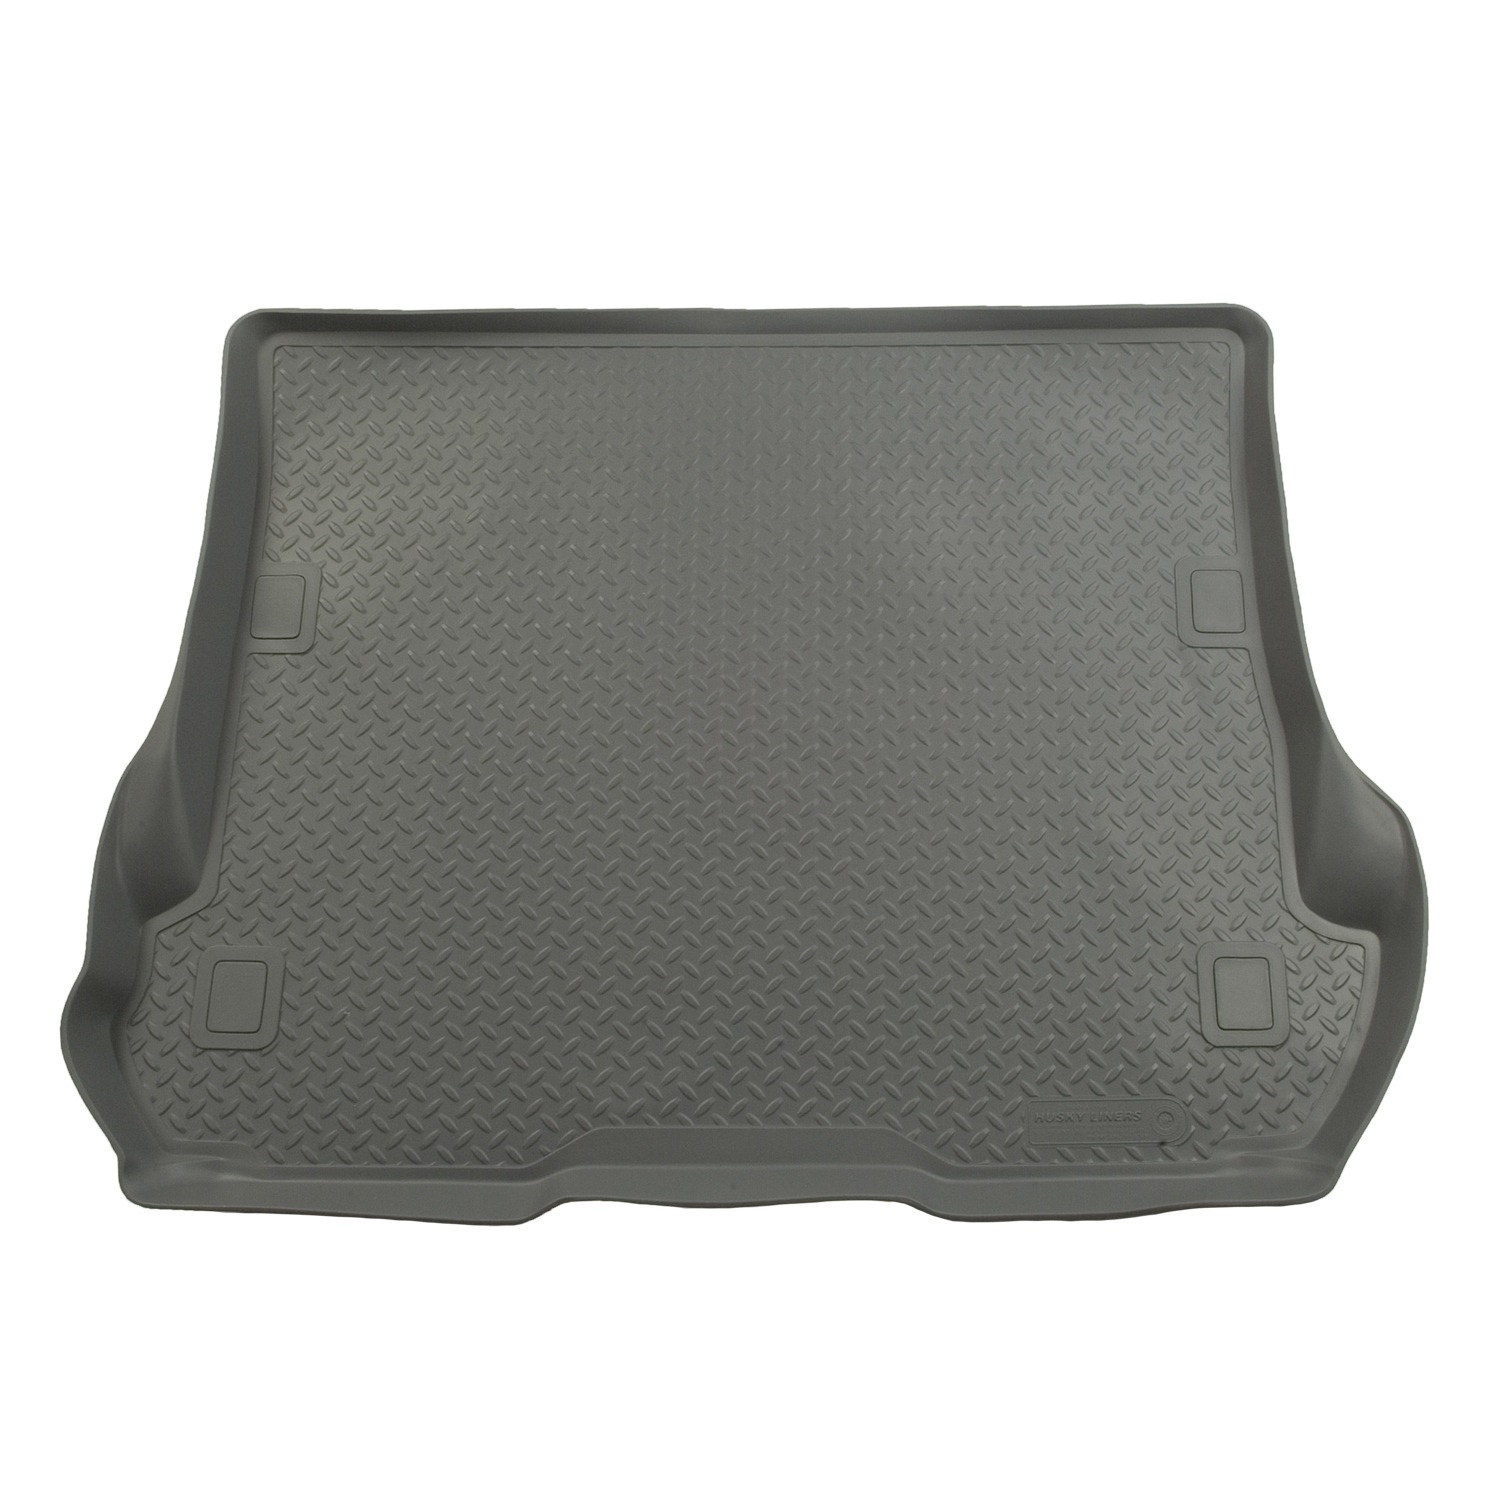 Husky Liners Husky Liners 26282 Classic Style; Cargo Liner Fits 05-14 Xterra